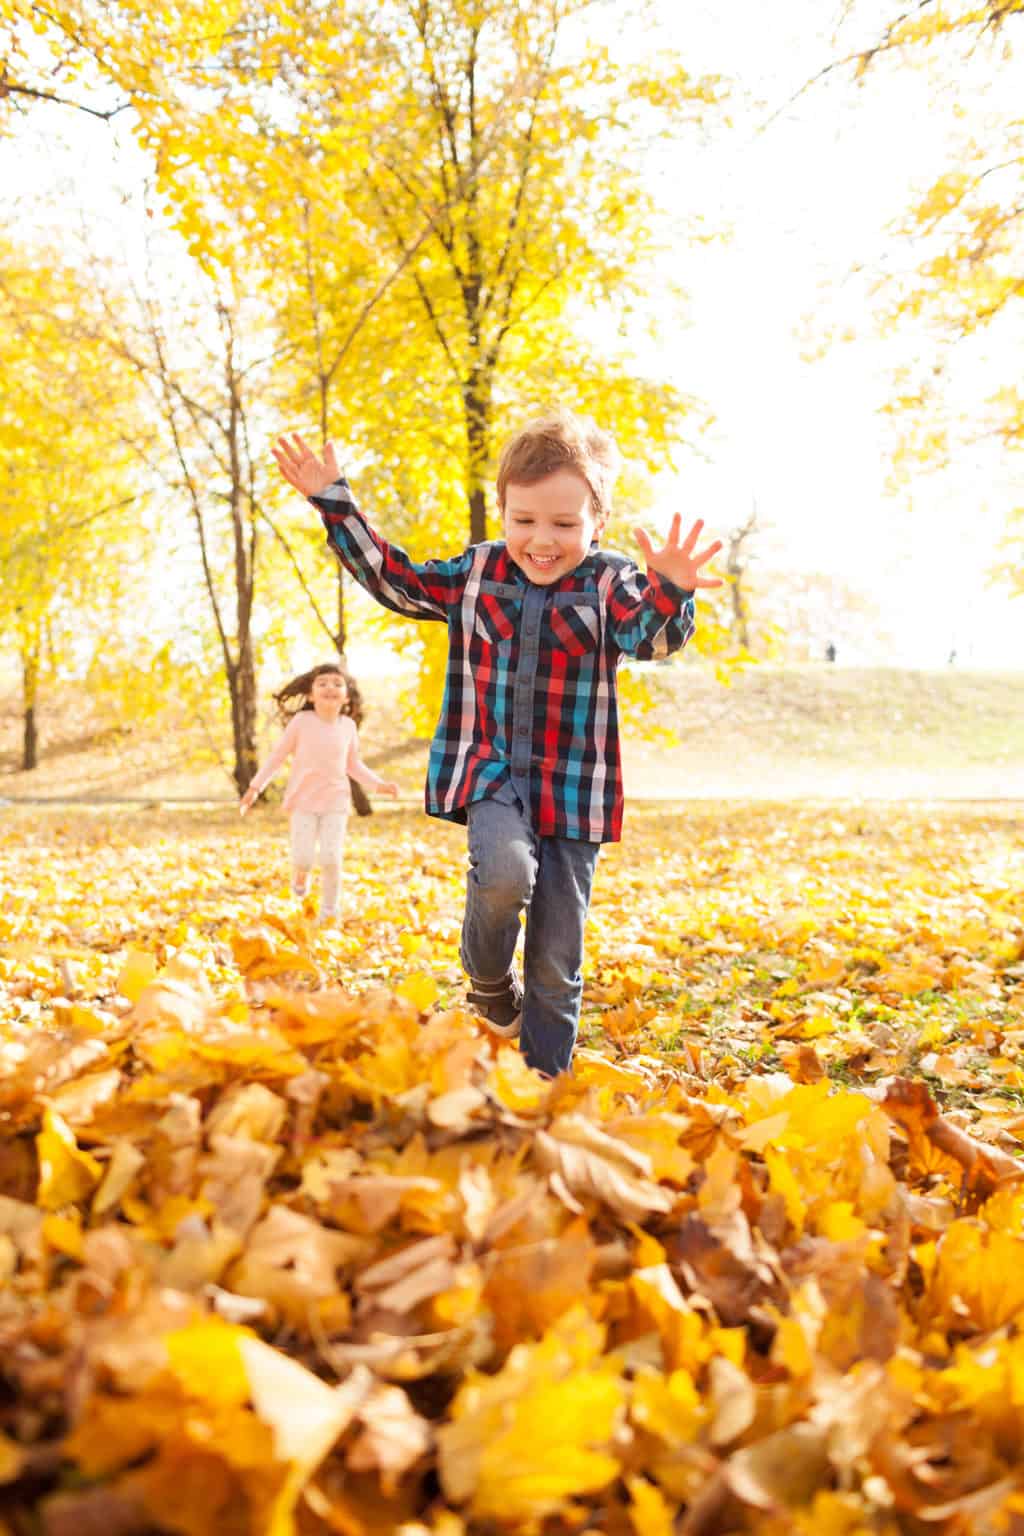 30 Ideas for Your Fall Fun at Home Bucket List